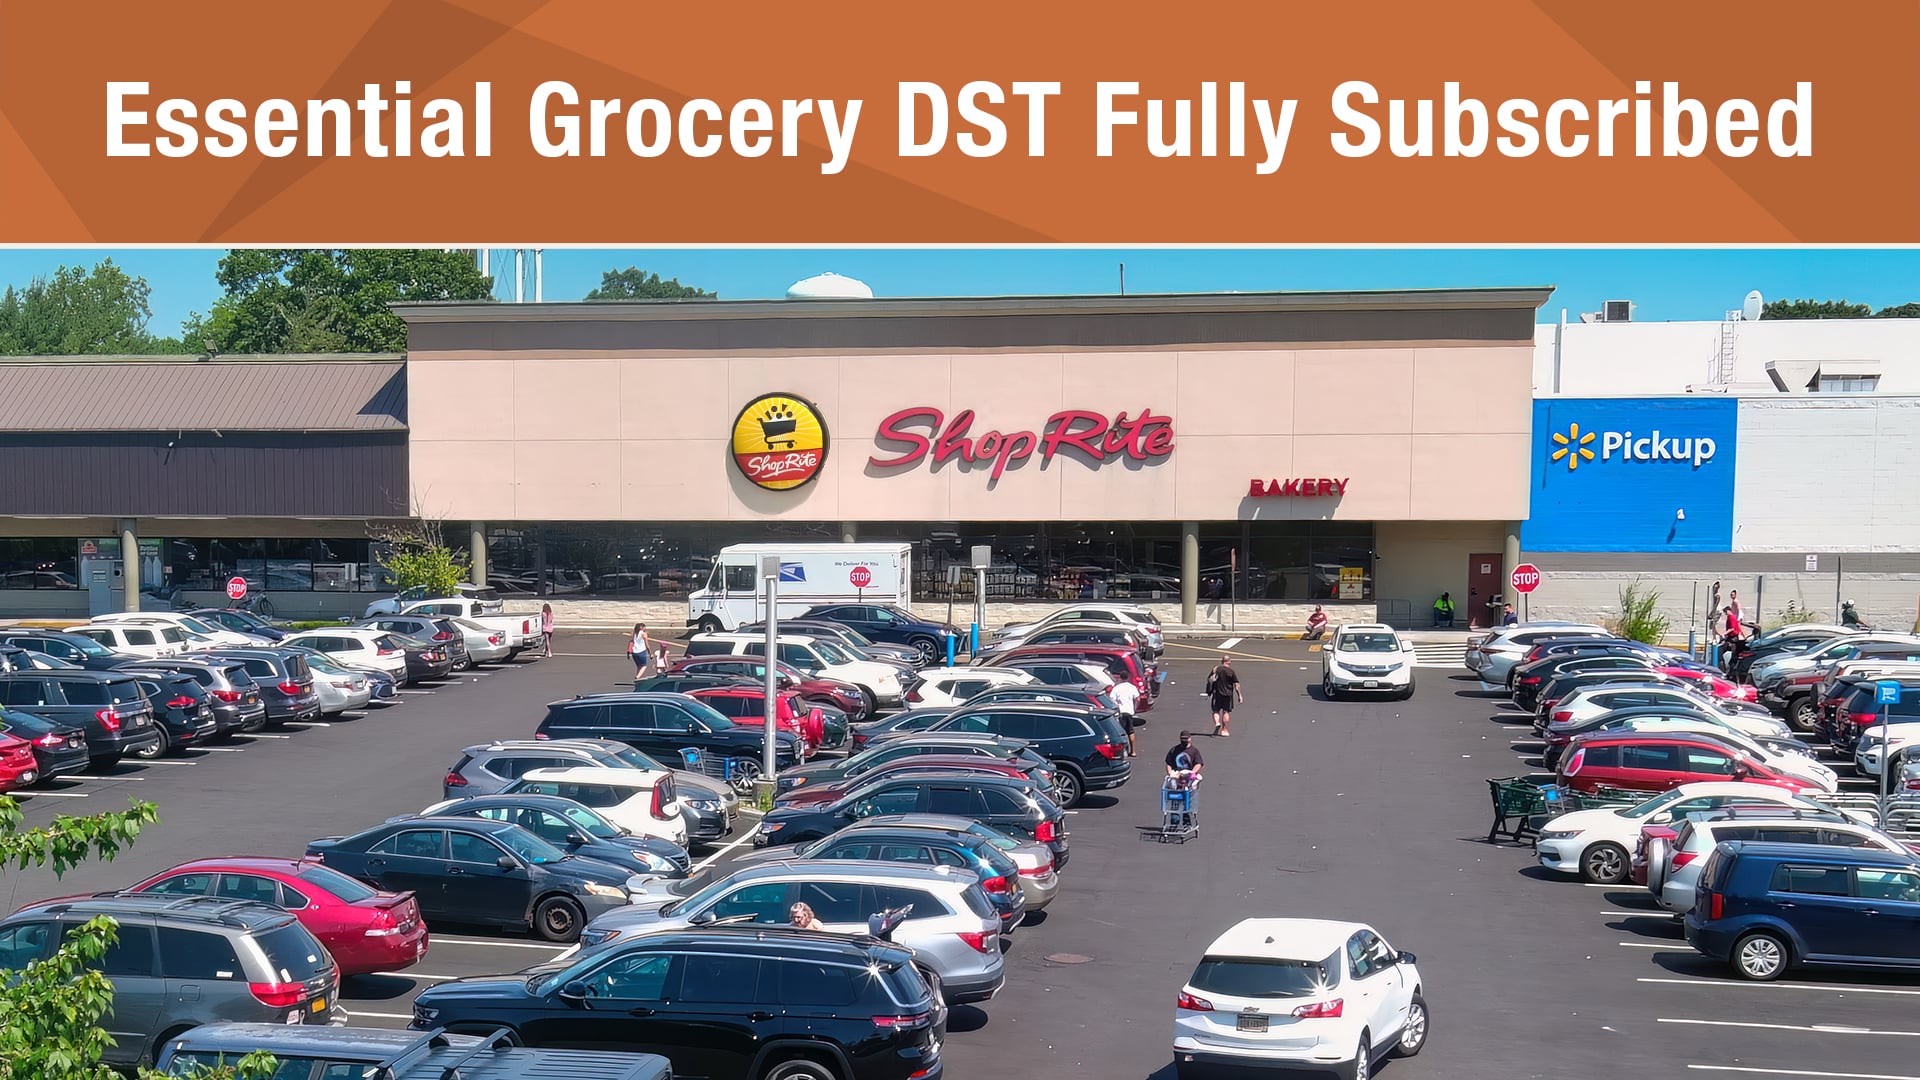 Essential Grocery - Fully Subscribed